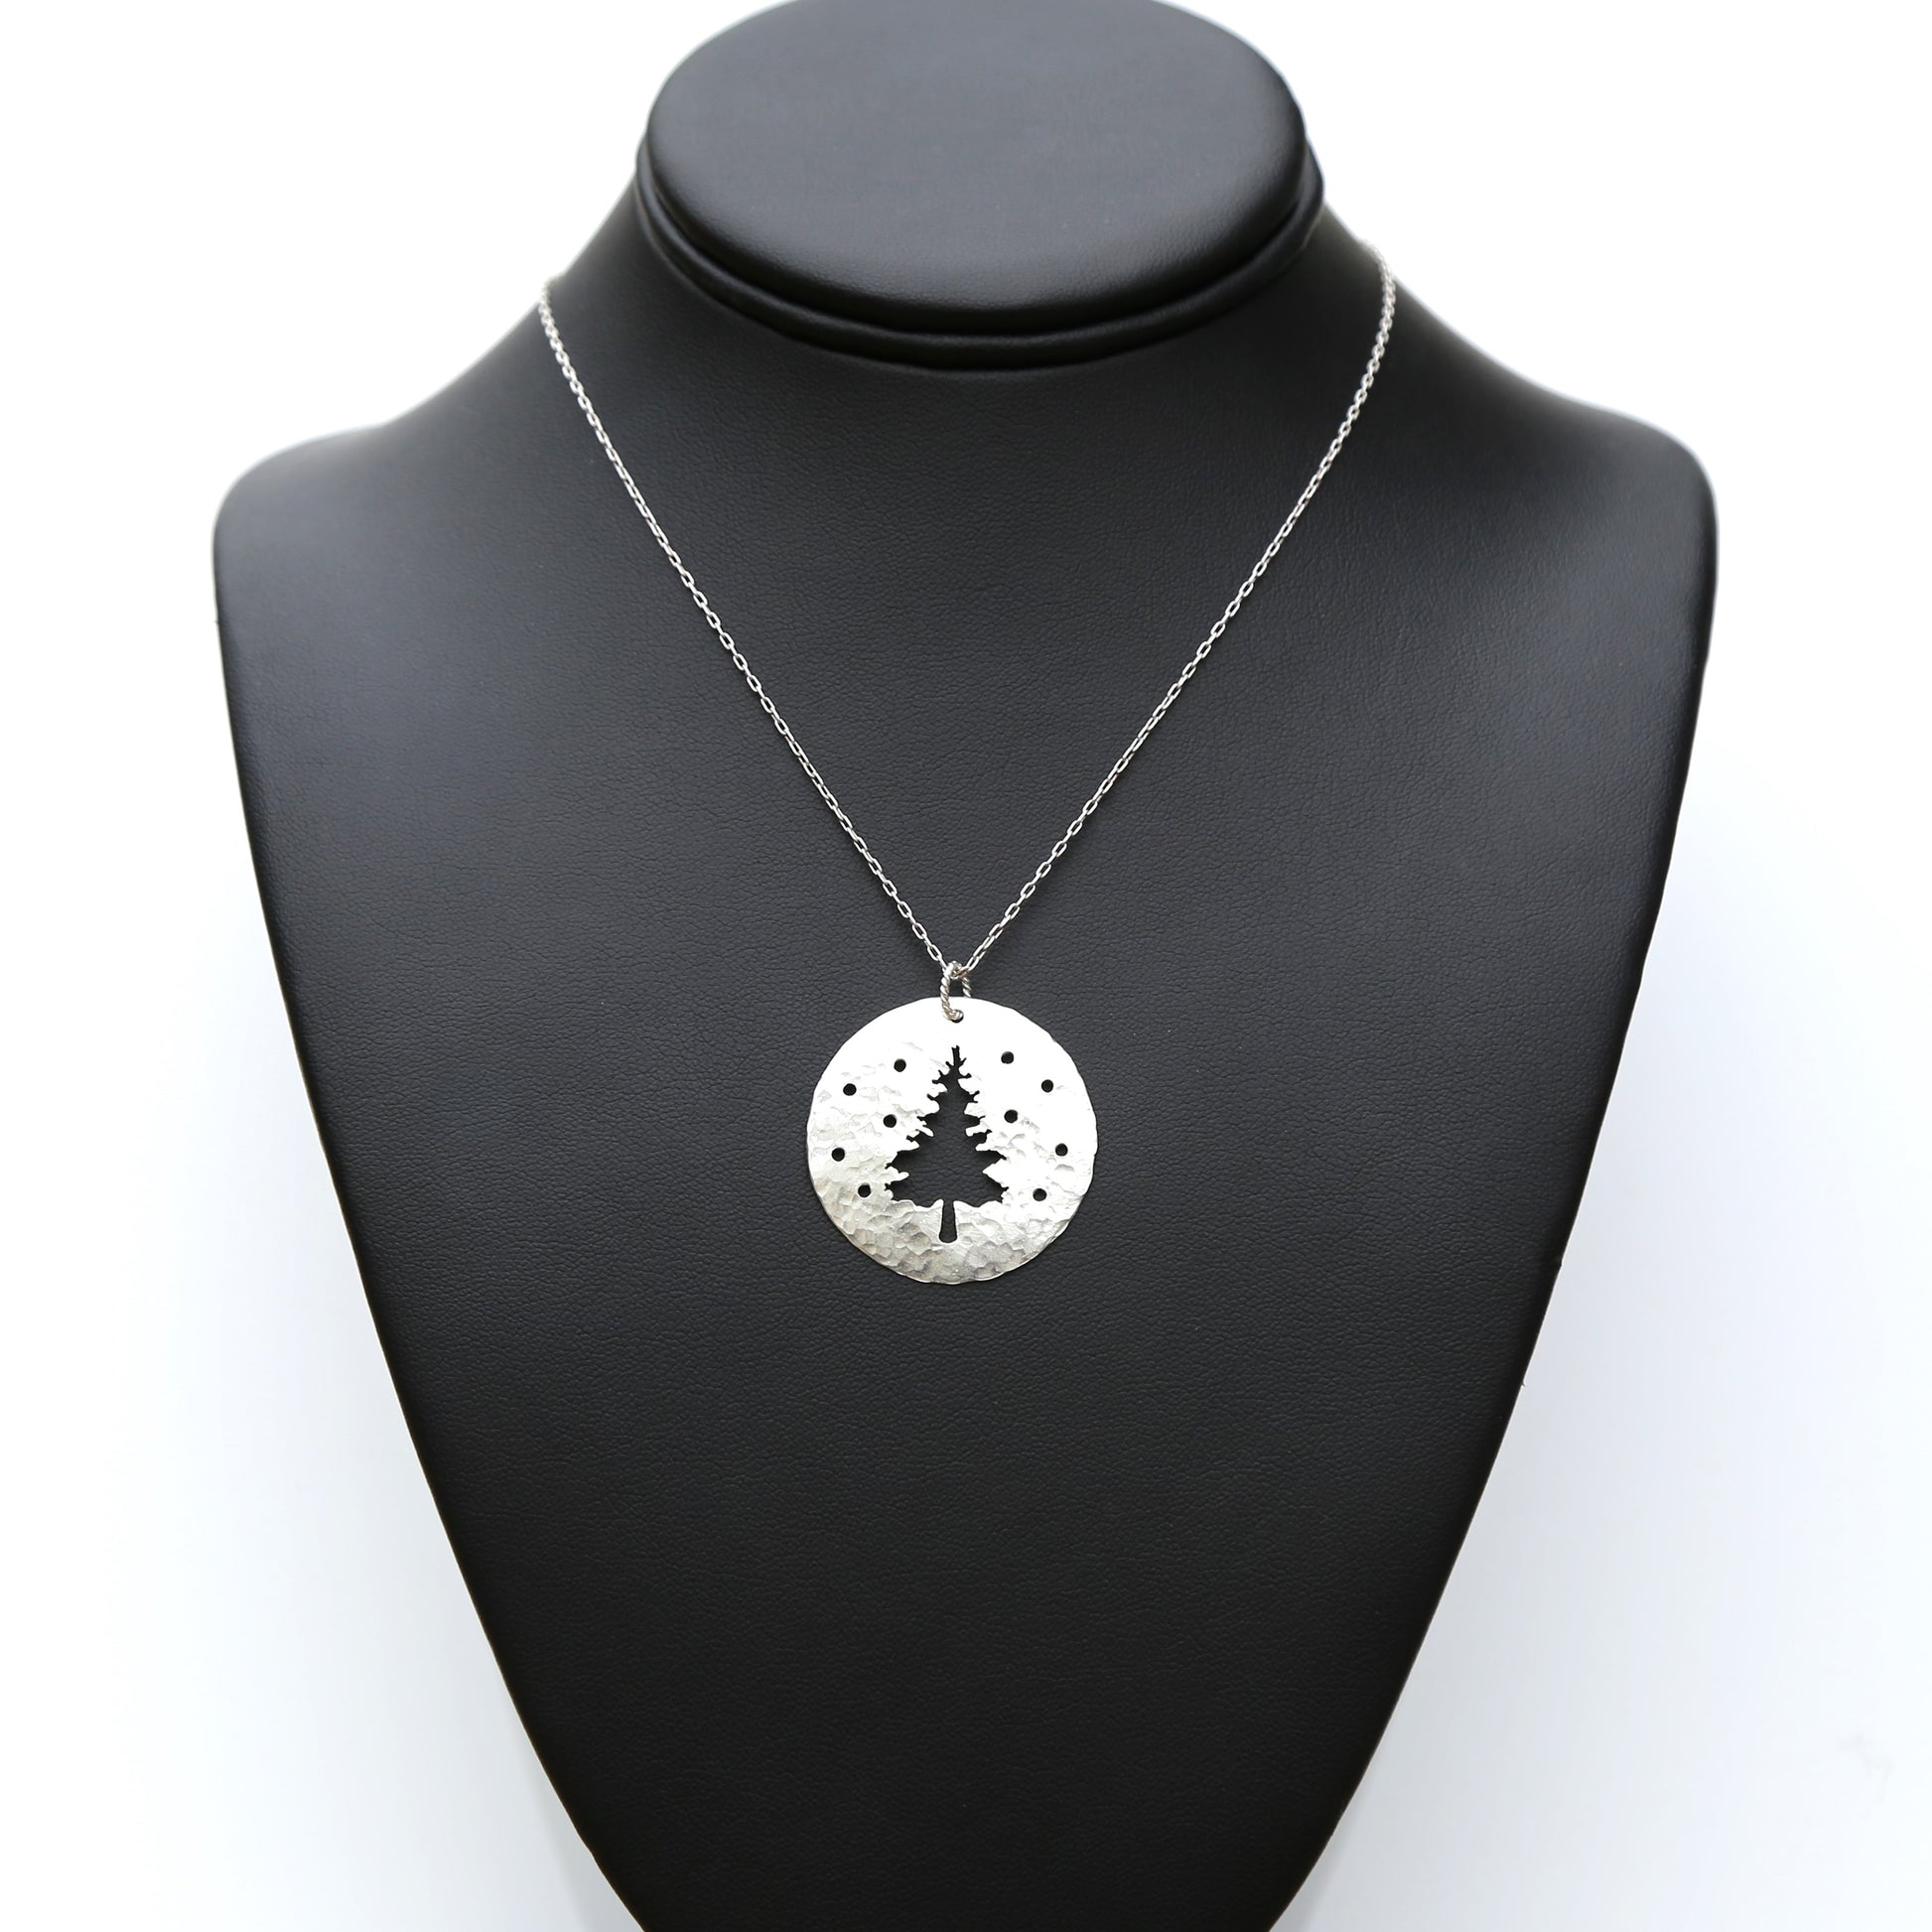 Winter in the Woods Pendant - Hand Cut and Hammered Circle Sterling Silver Pendant that Evokes a Pine Tree in a Snowy Forest